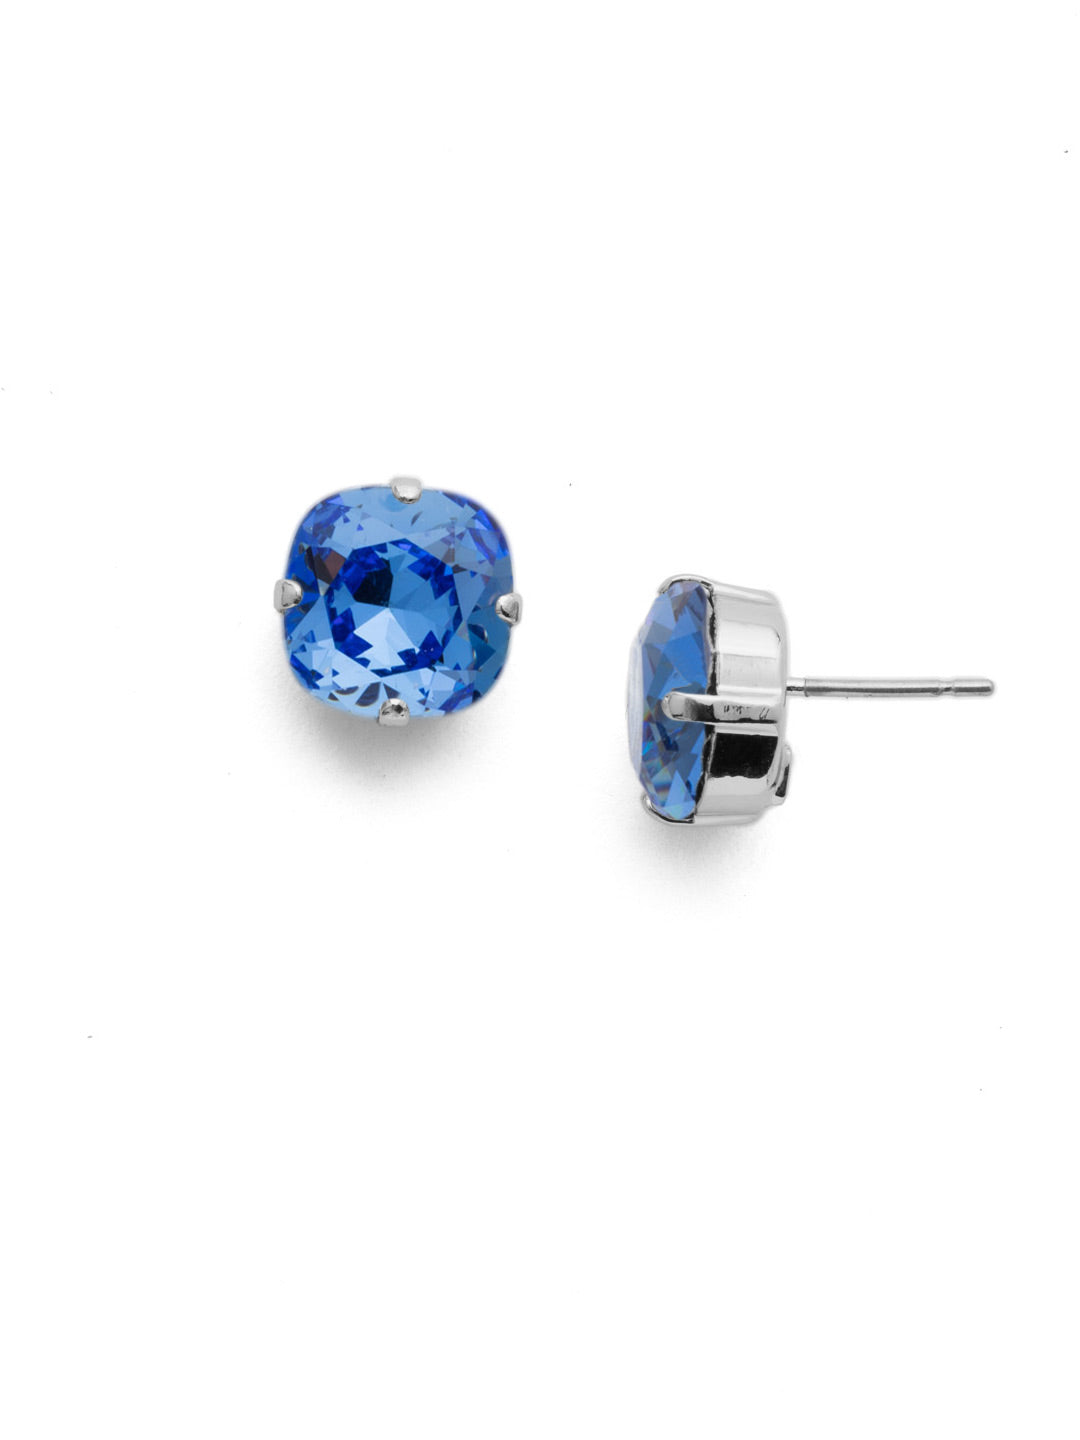 Halcyon Stud Earrings - EDH25PDSAP - <p>A beautiful, luminous cushion-cut crystal in a classic four-pronged setting that's ideal for everyday wear. From Sorrelli's Sapphire collection in our Palladium finish.</p>